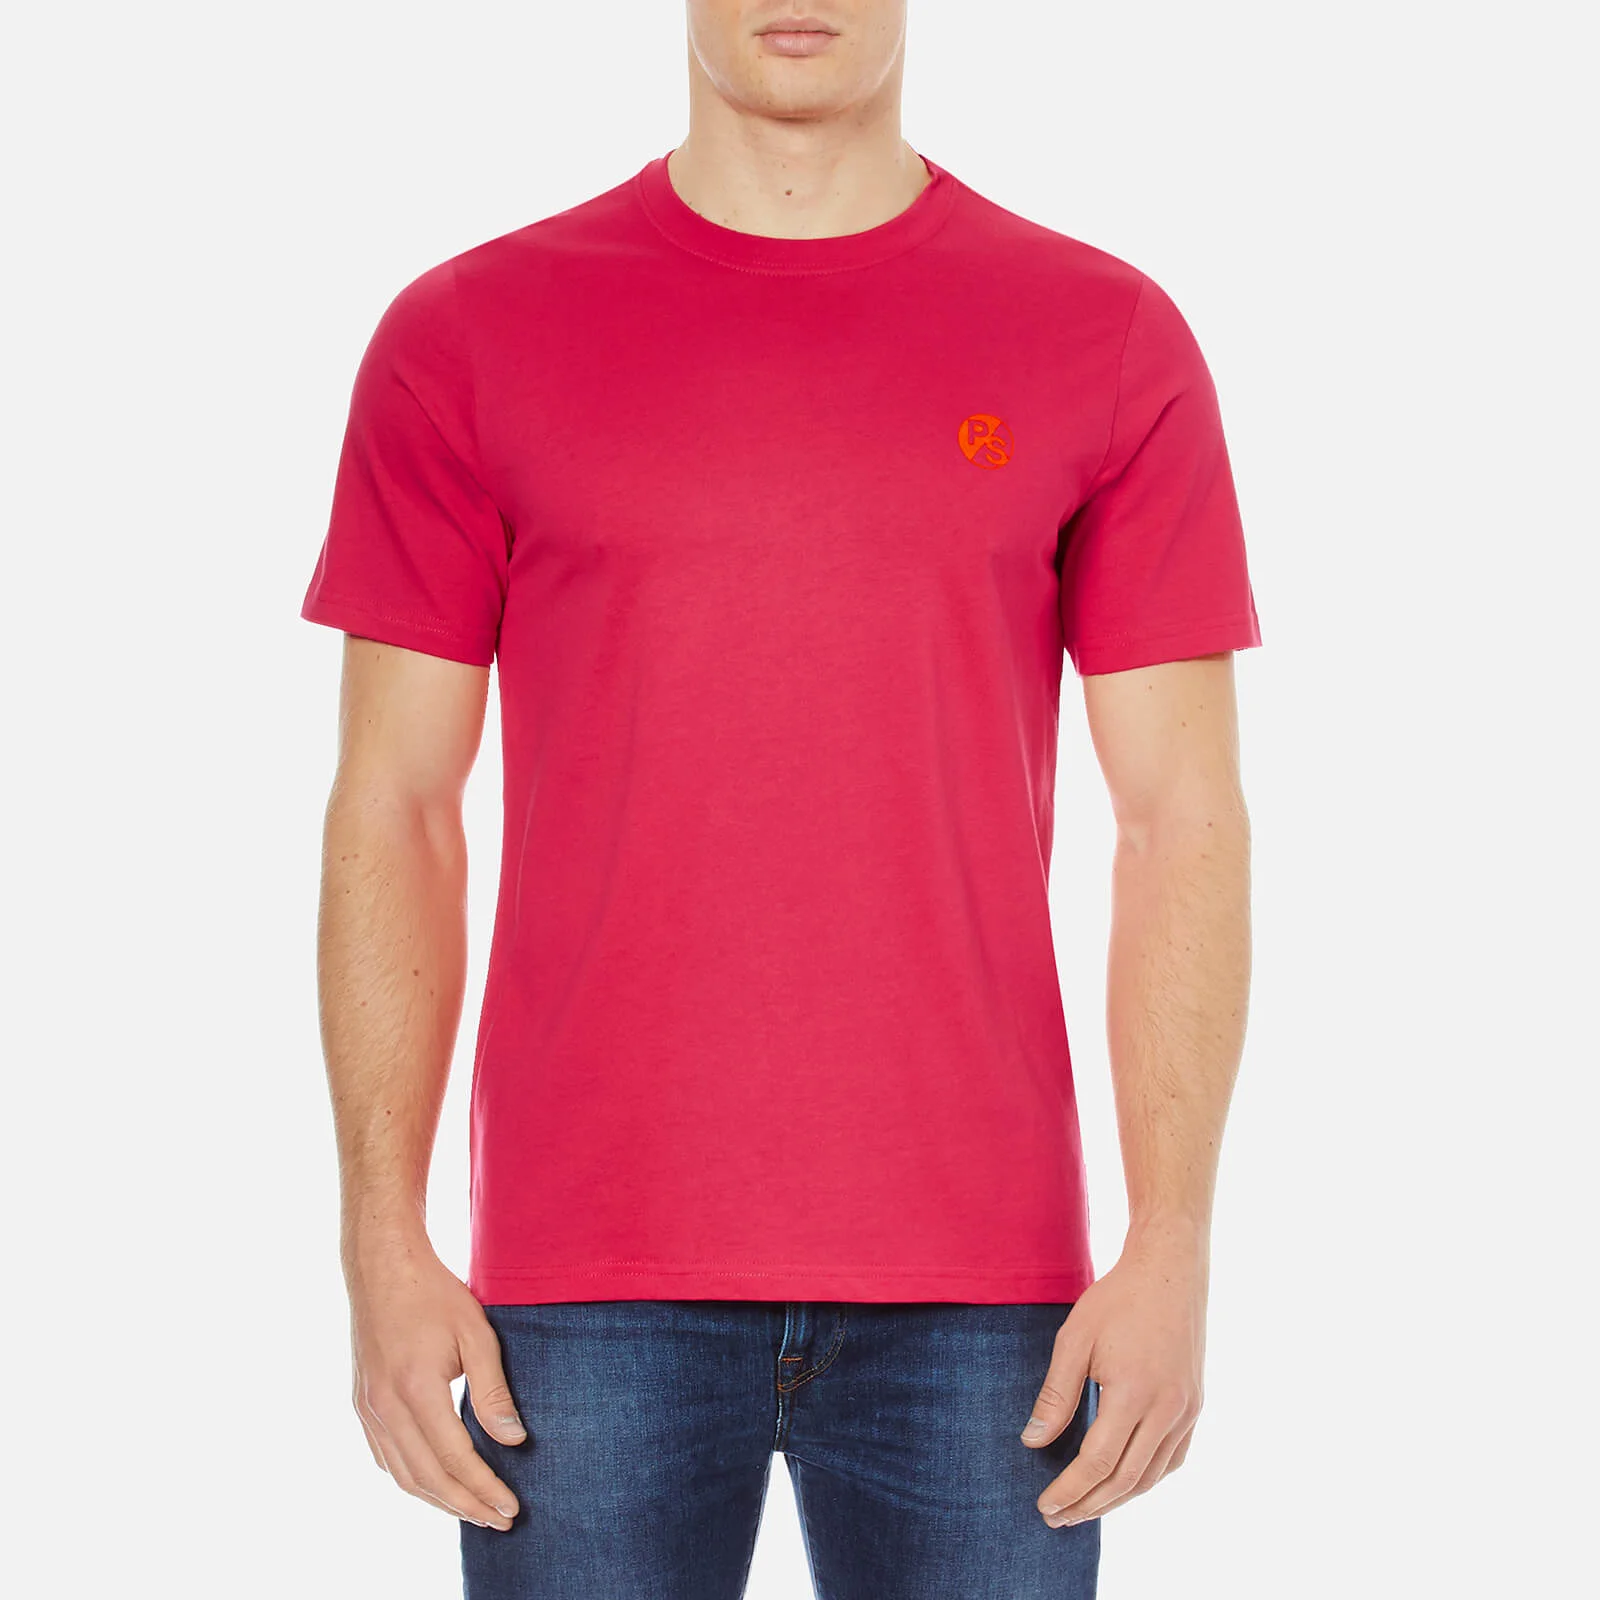 PS by Paul Smith Men's Crew Neck T-Shirt - Red Image 1